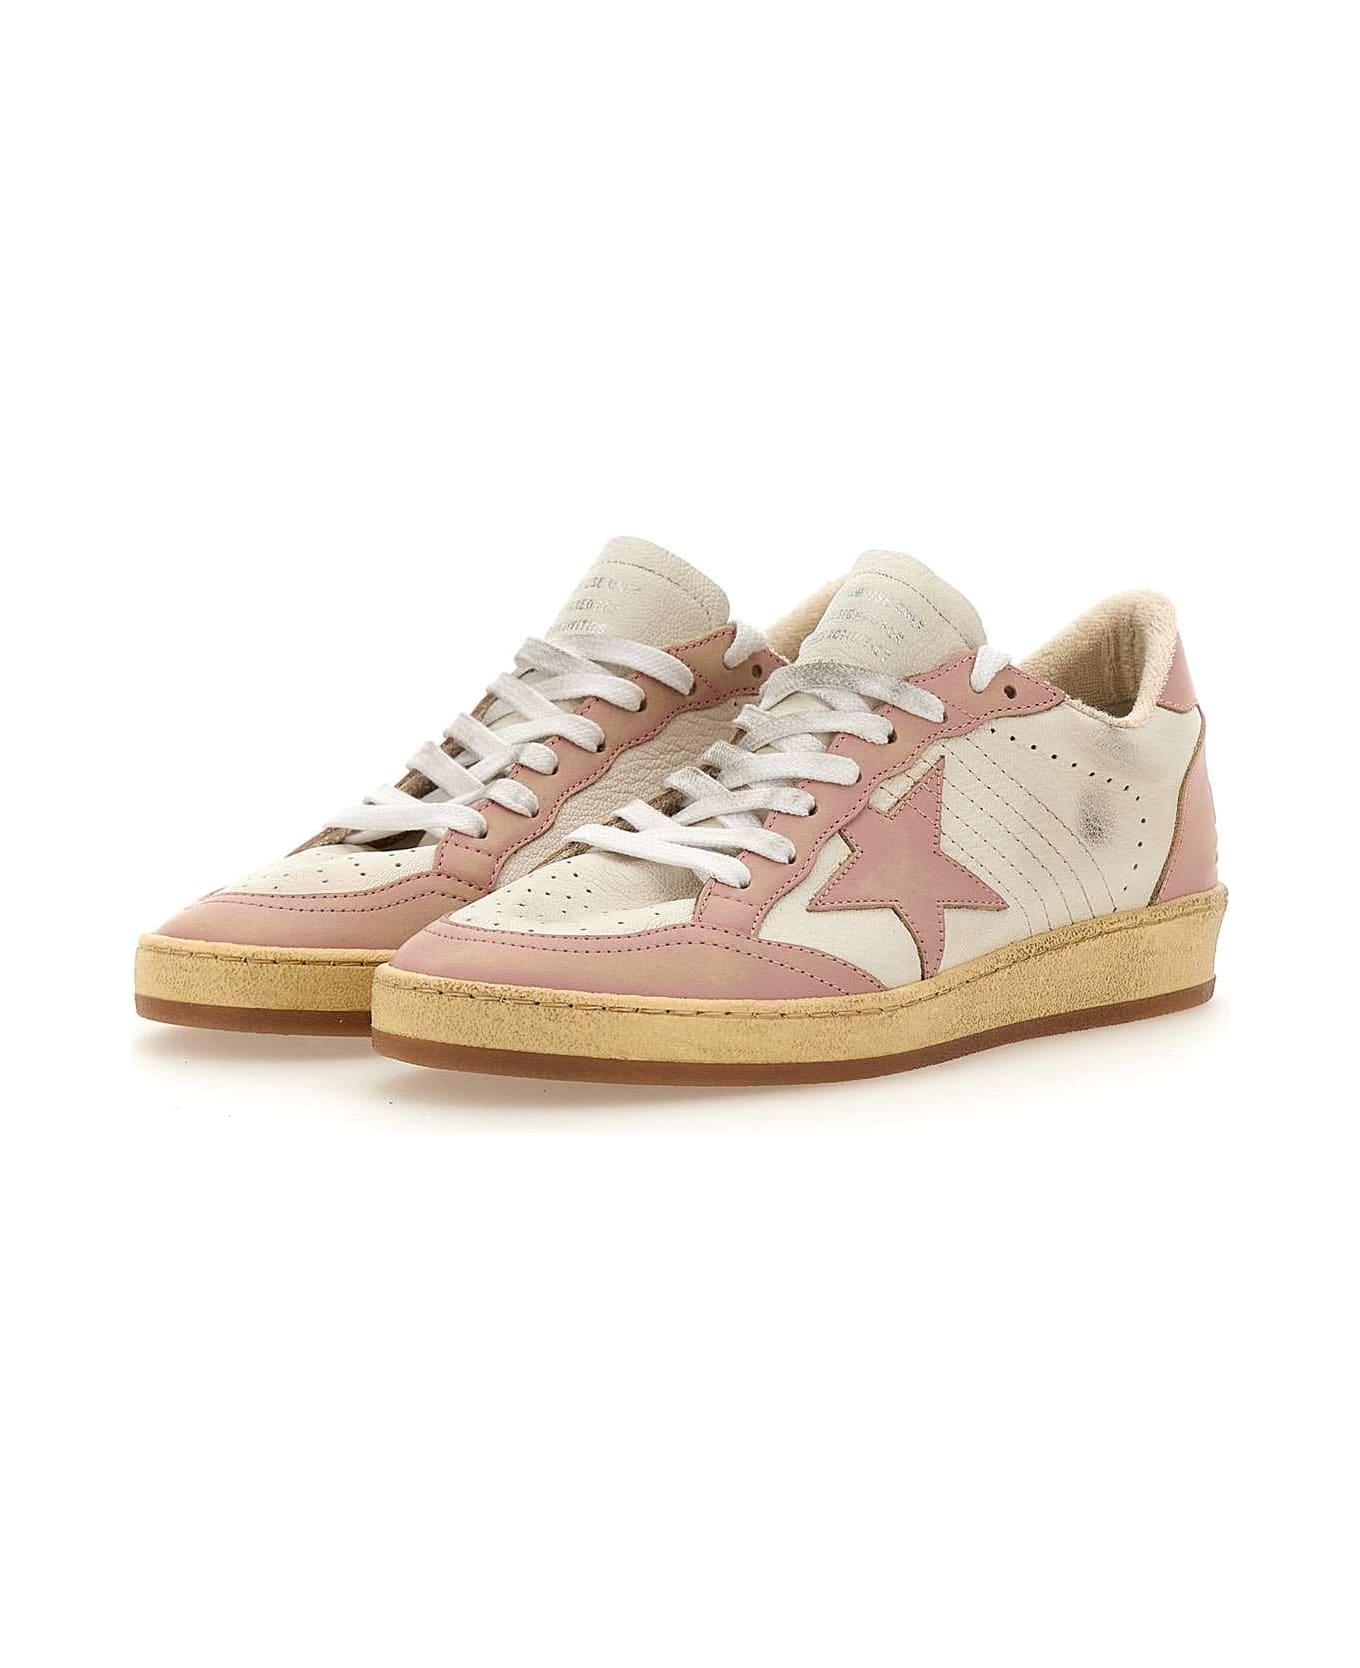 Golden Goose Ball Star Leather Sneakers - White/Pink